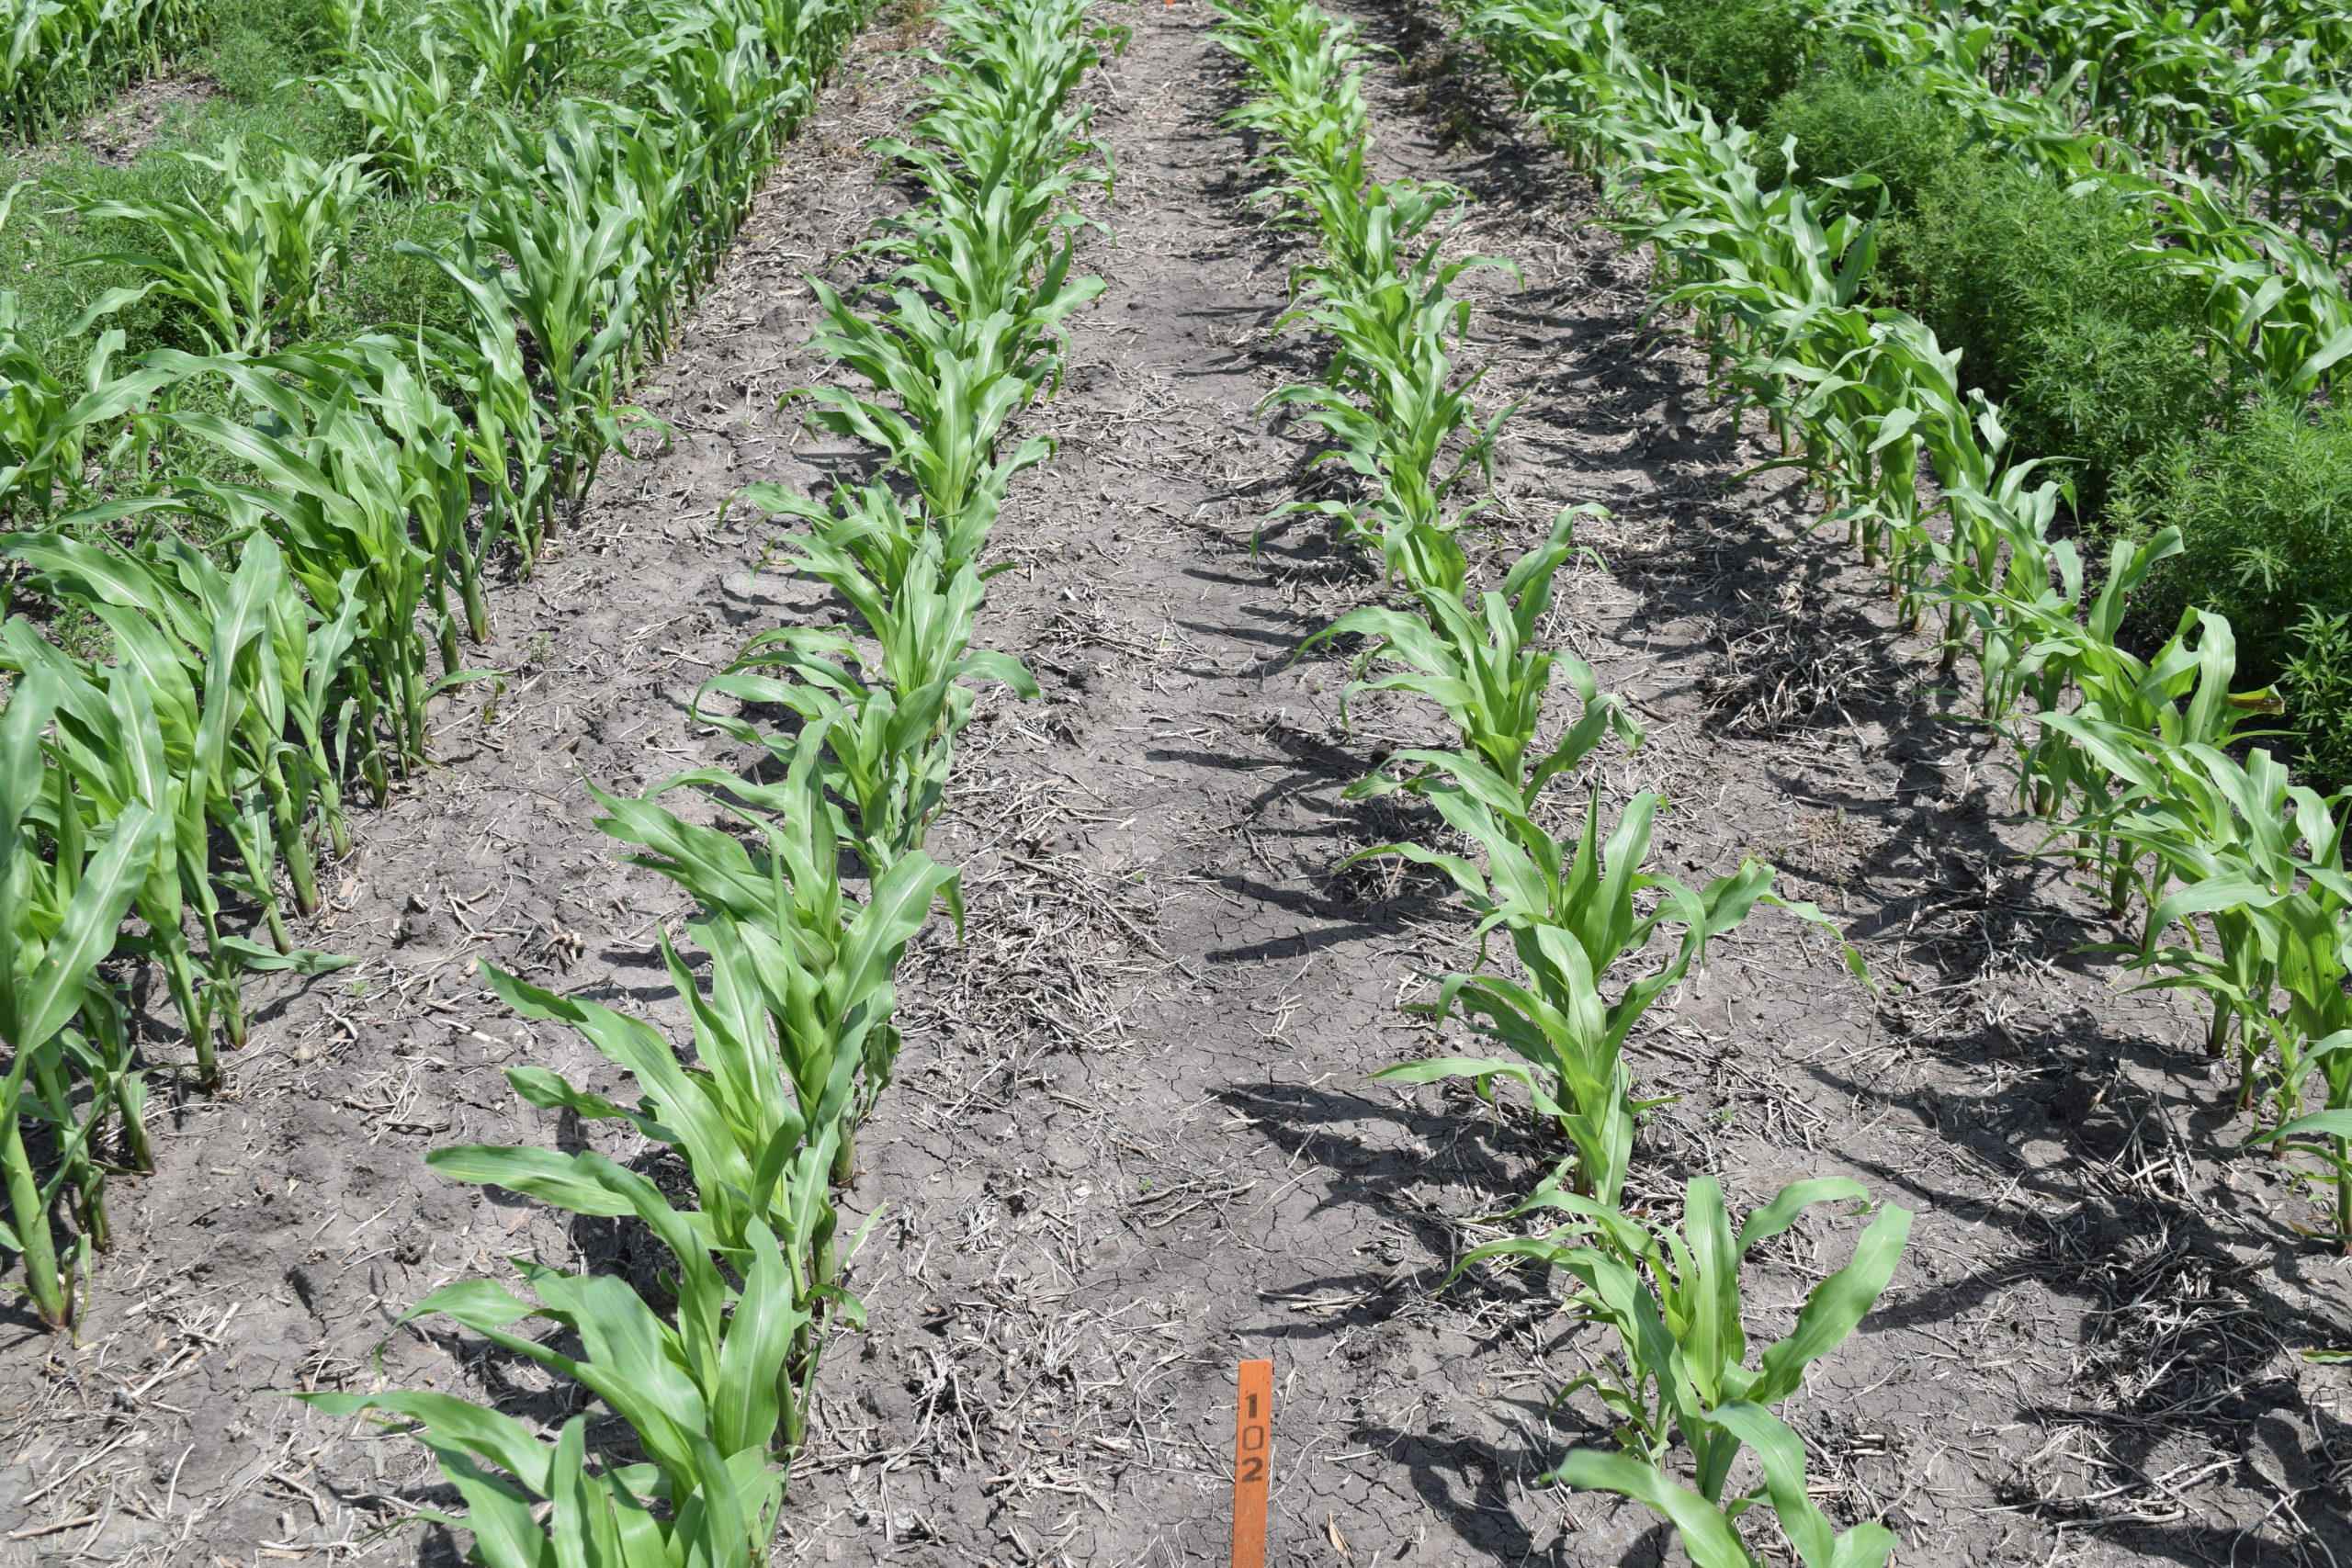 Acuron® GT shows that it can provide clean rows for your corn